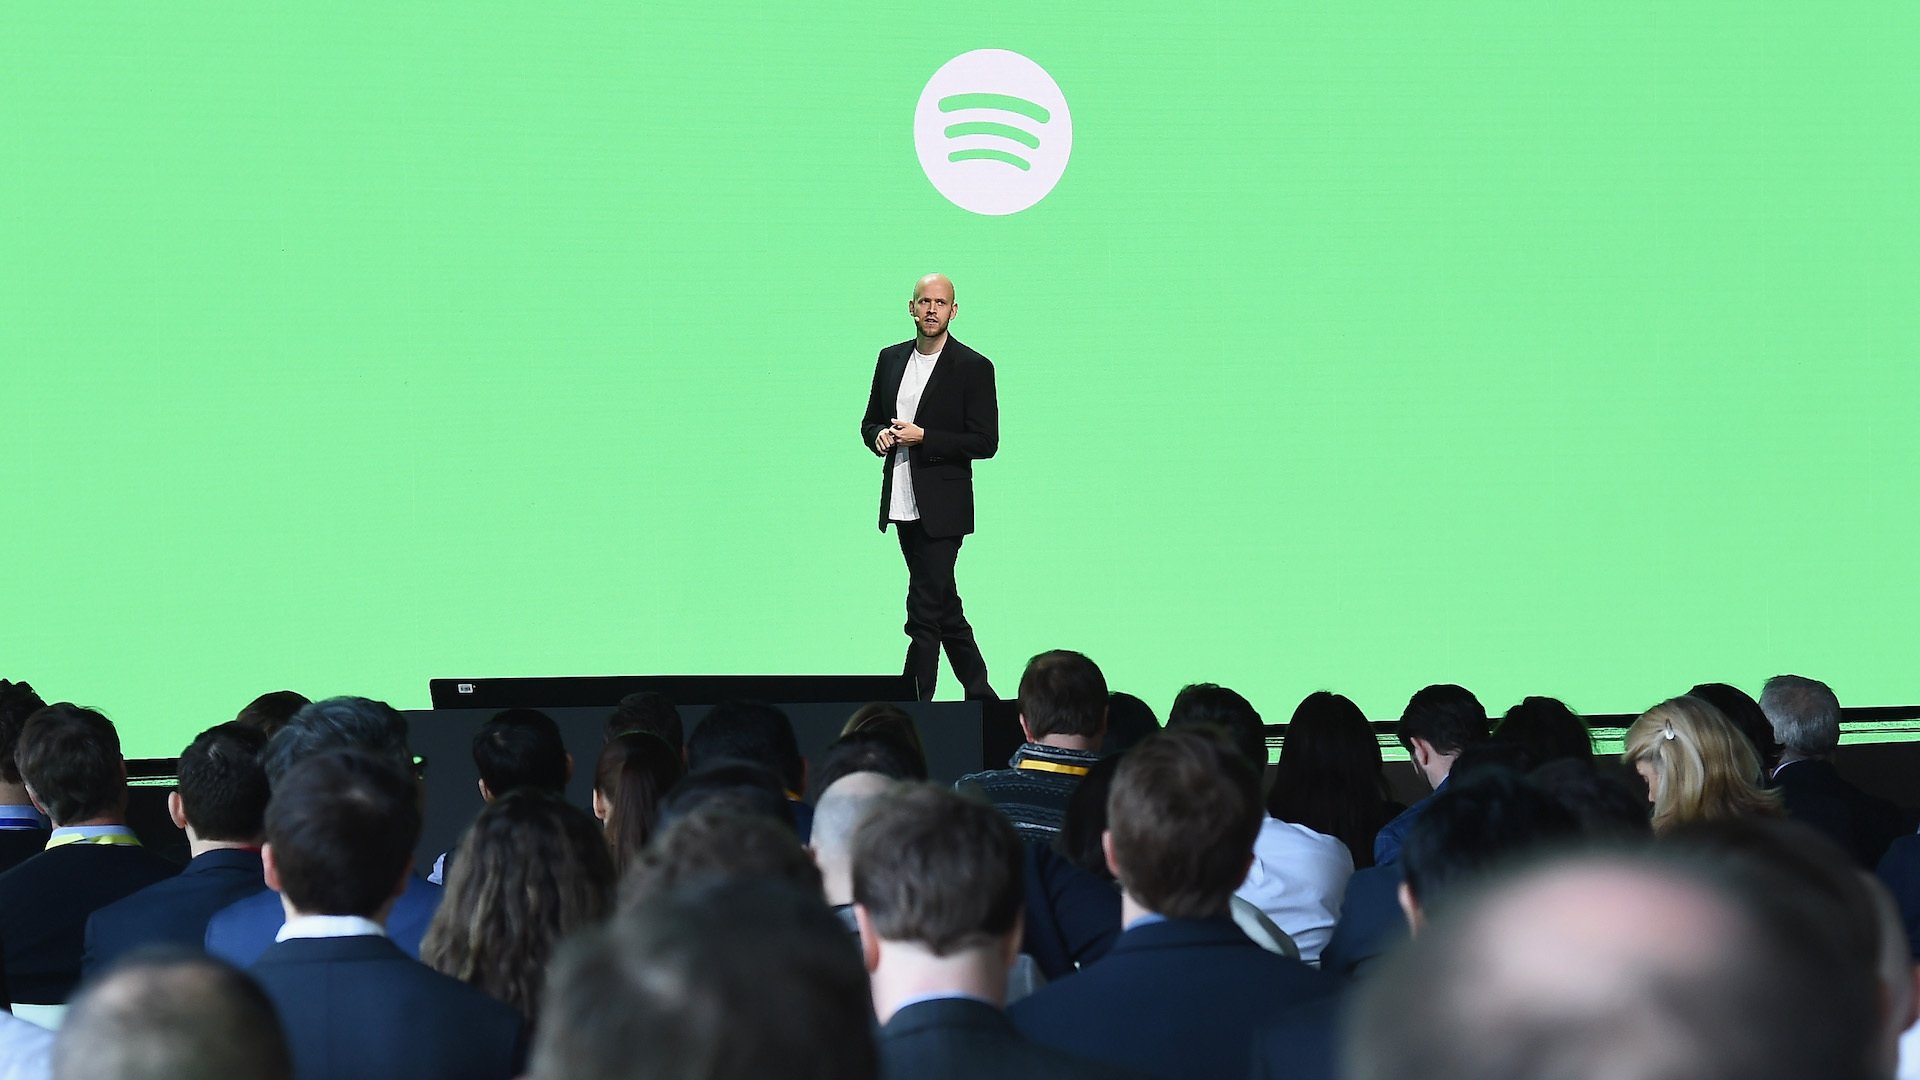 Founder and Chief Executive Officer of Spotify Daniel Ek speaks onstage during Spotify Investor Day at Spring Studios on March 15, 2018